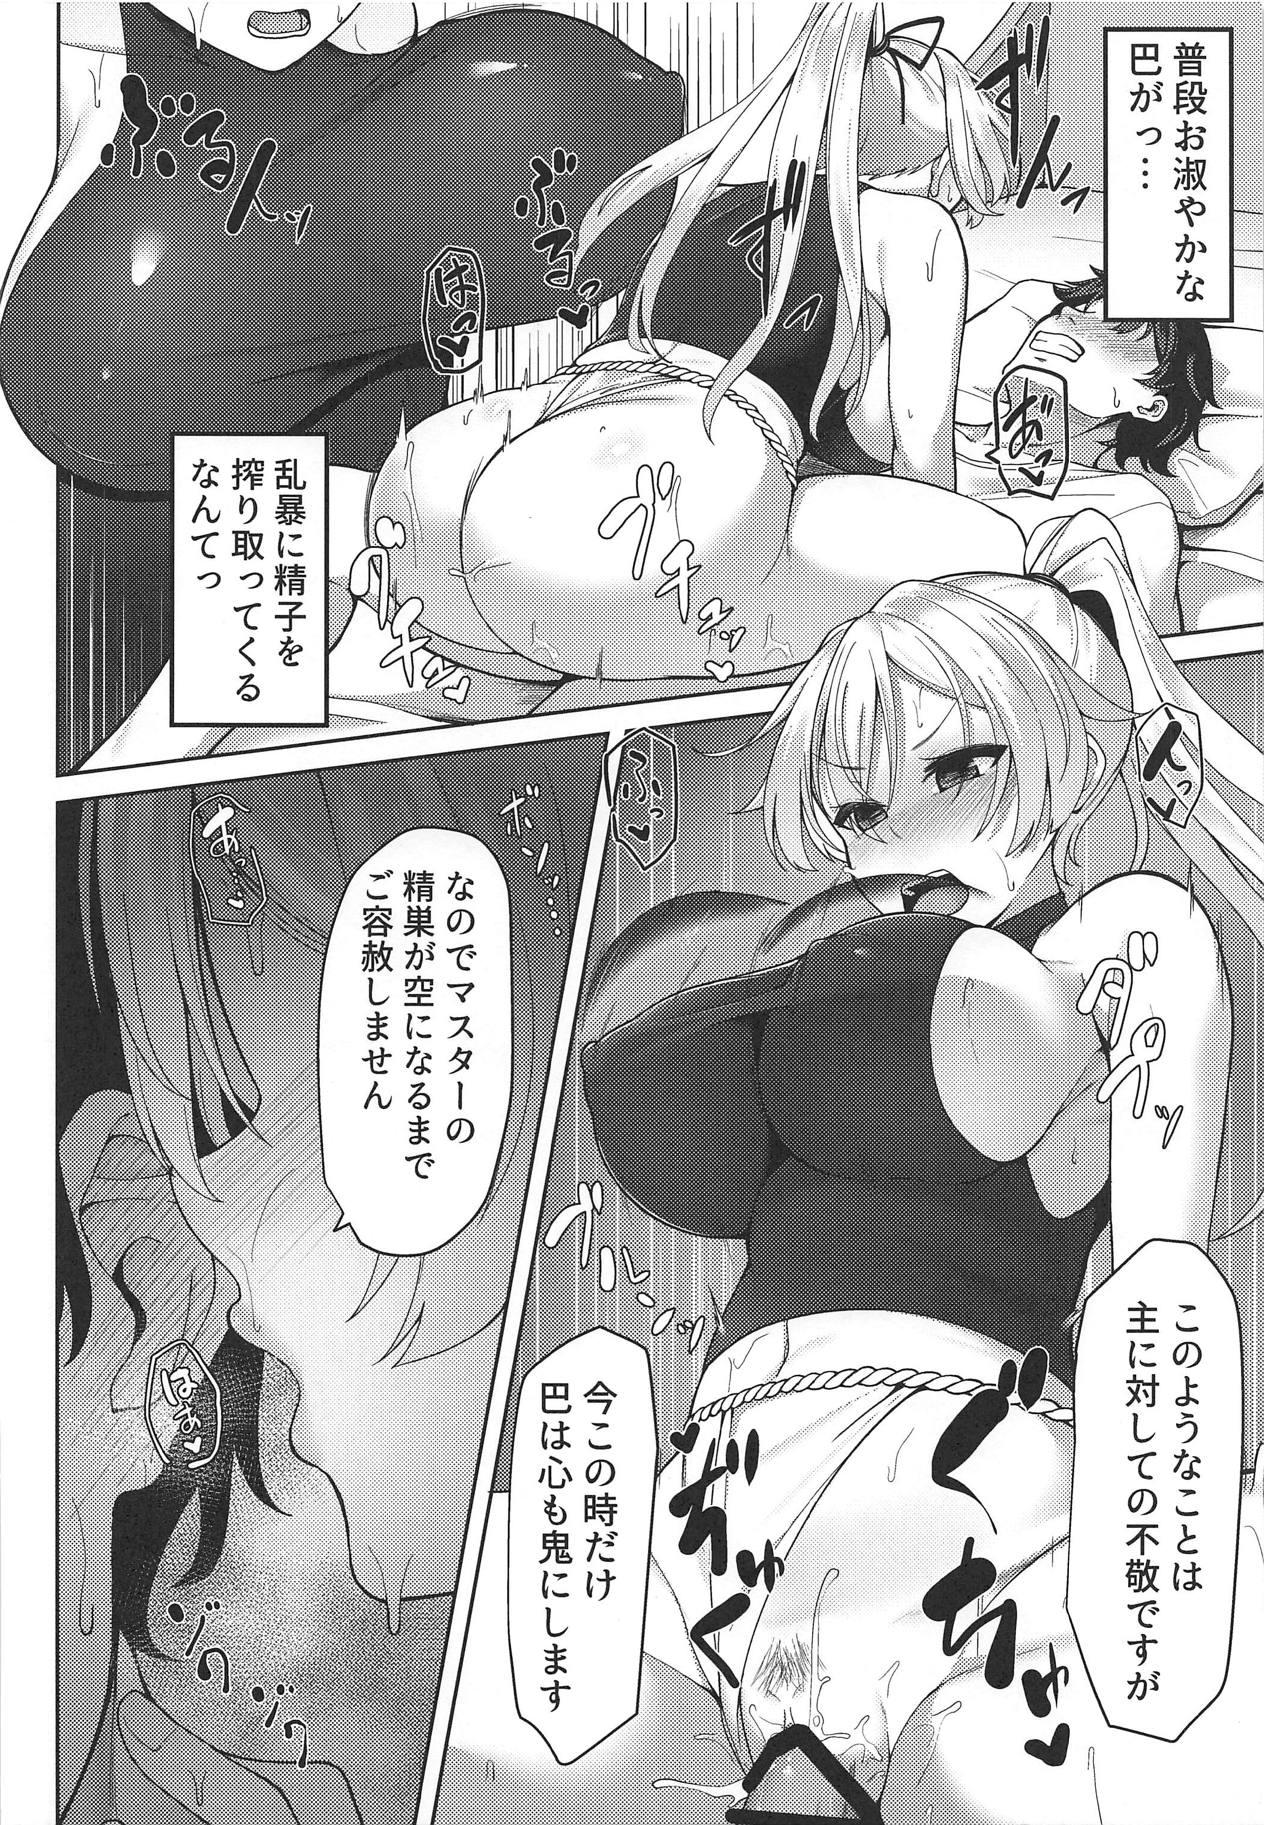 Butt Plug ☆☆☆☆☆☆☆☆Sand - Fate grand order Tight Pussy - Page 9